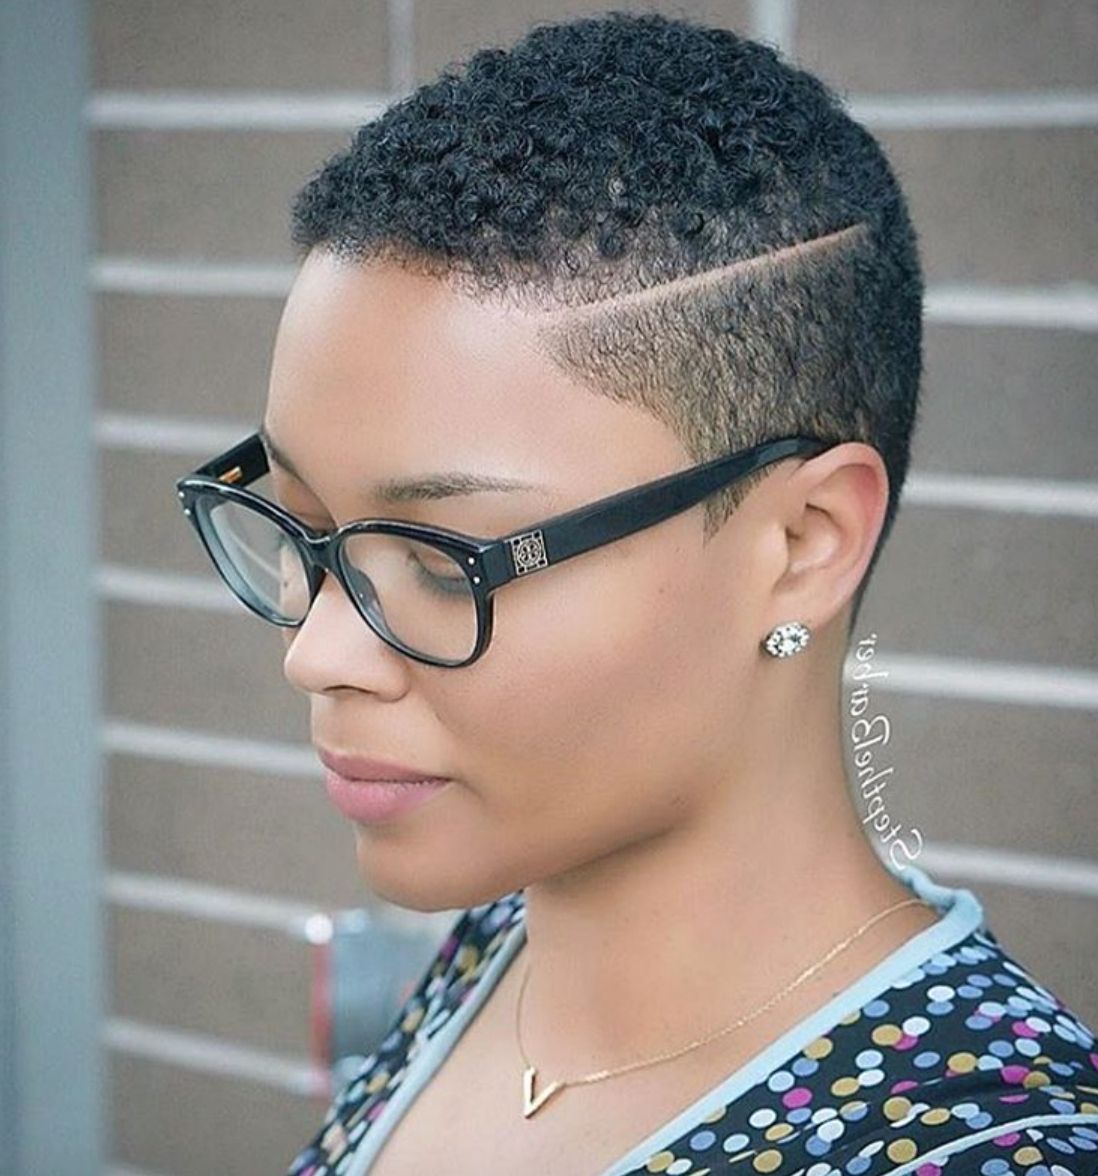 Pintherealtifflove On Natural Hair In 2018 | Pinterest | Short Within Black Women Short Haircuts (View 23 of 25)